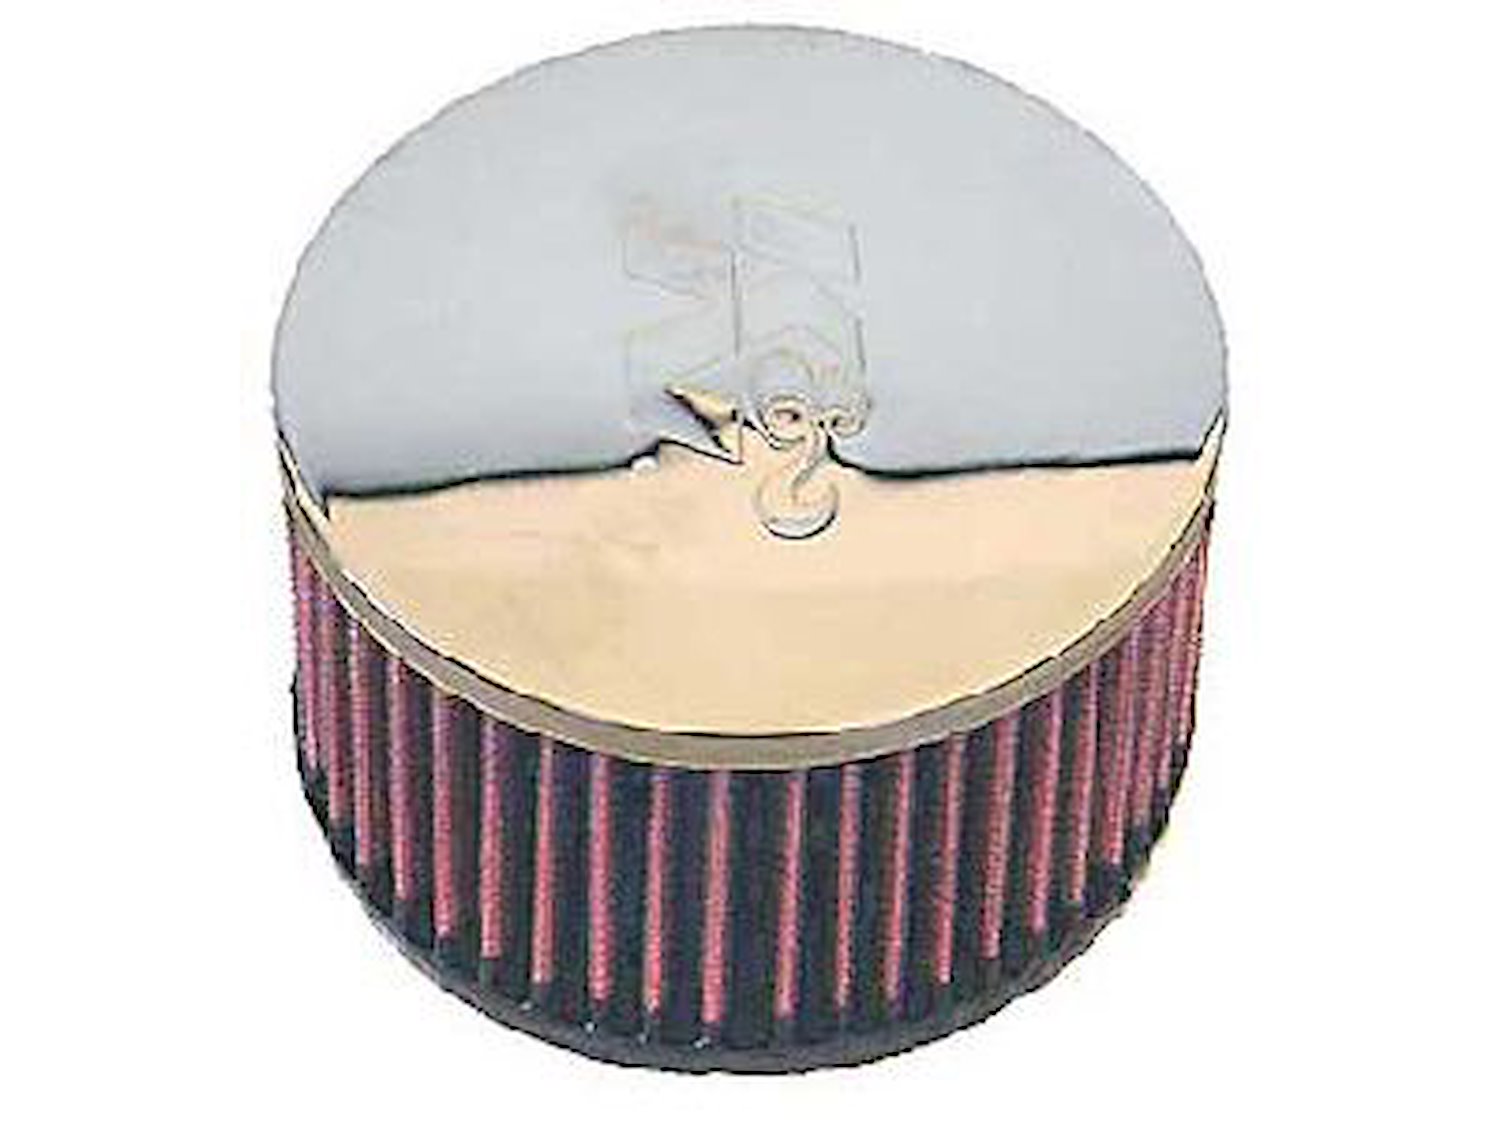 Round Straight Air Filter Flange Dia. (F): 2.438" (62 mm)